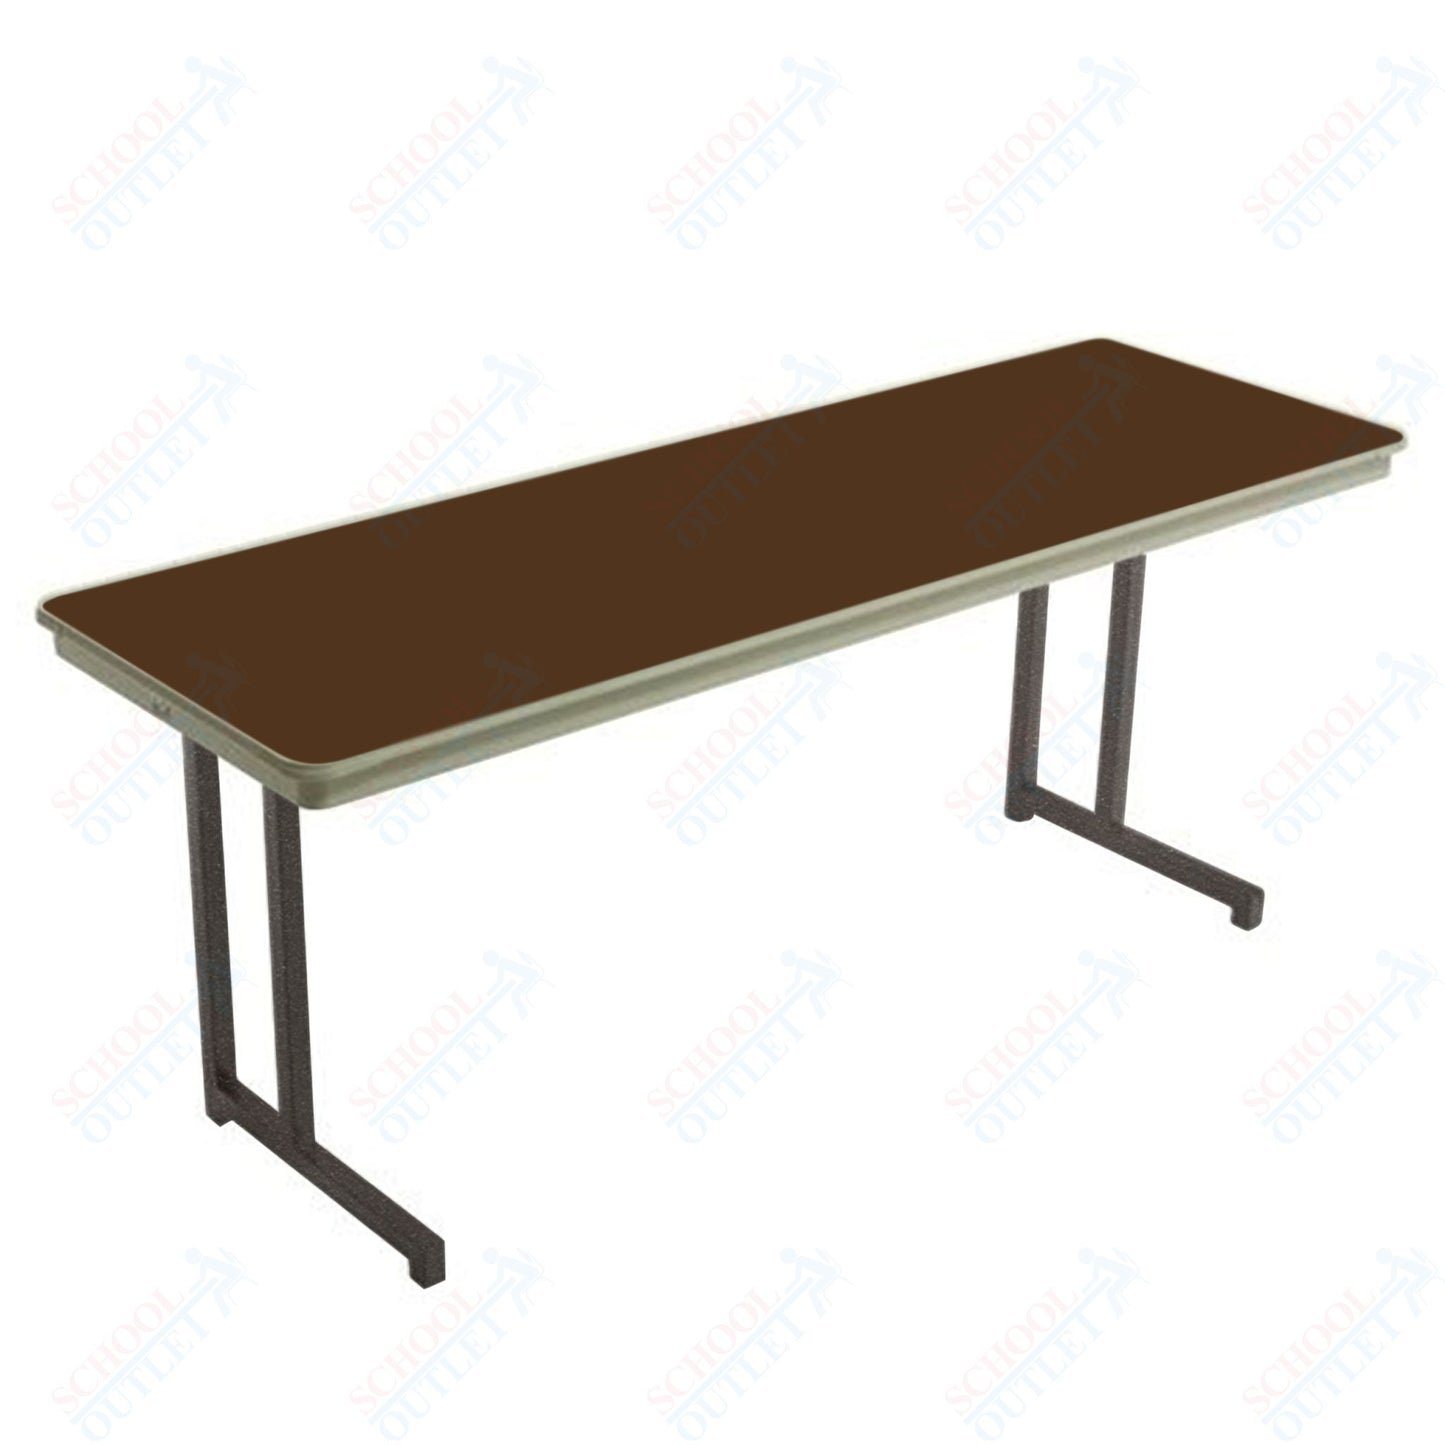 AmTab Dynalite Featherweight Heavy - Duty ABS Plastic Training Table - Rectangle - 24"W x 60"L x 29"H (AmTab AMT - TT245DL) - SchoolOutlet